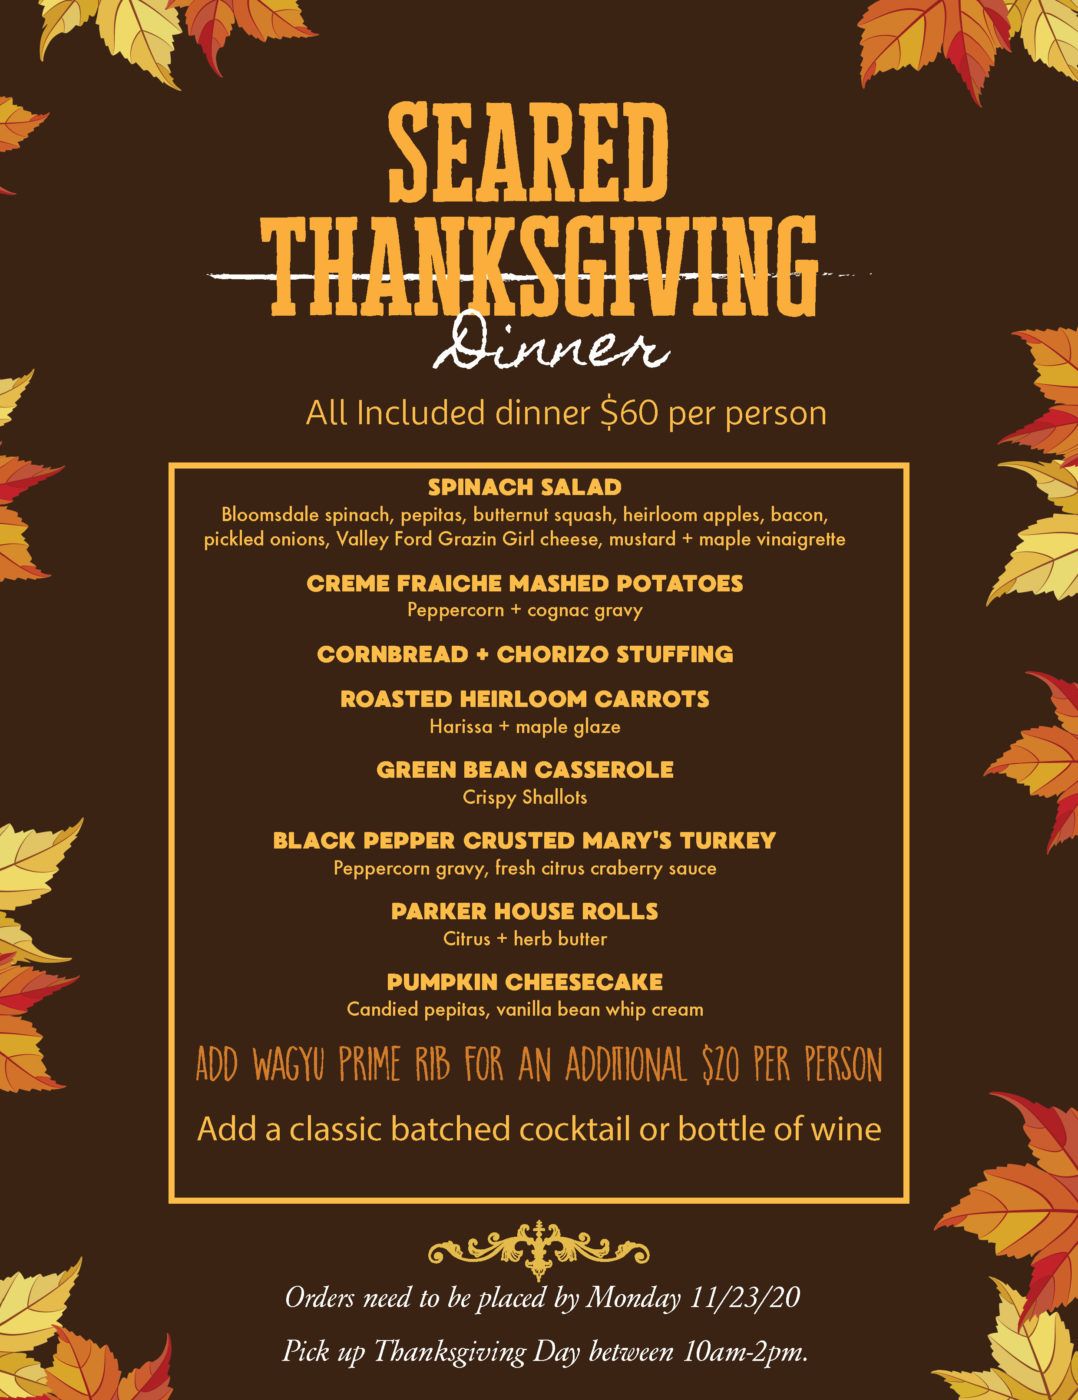 Limited Special Thanksgiving Dinner menu available at Seared in Petaluma